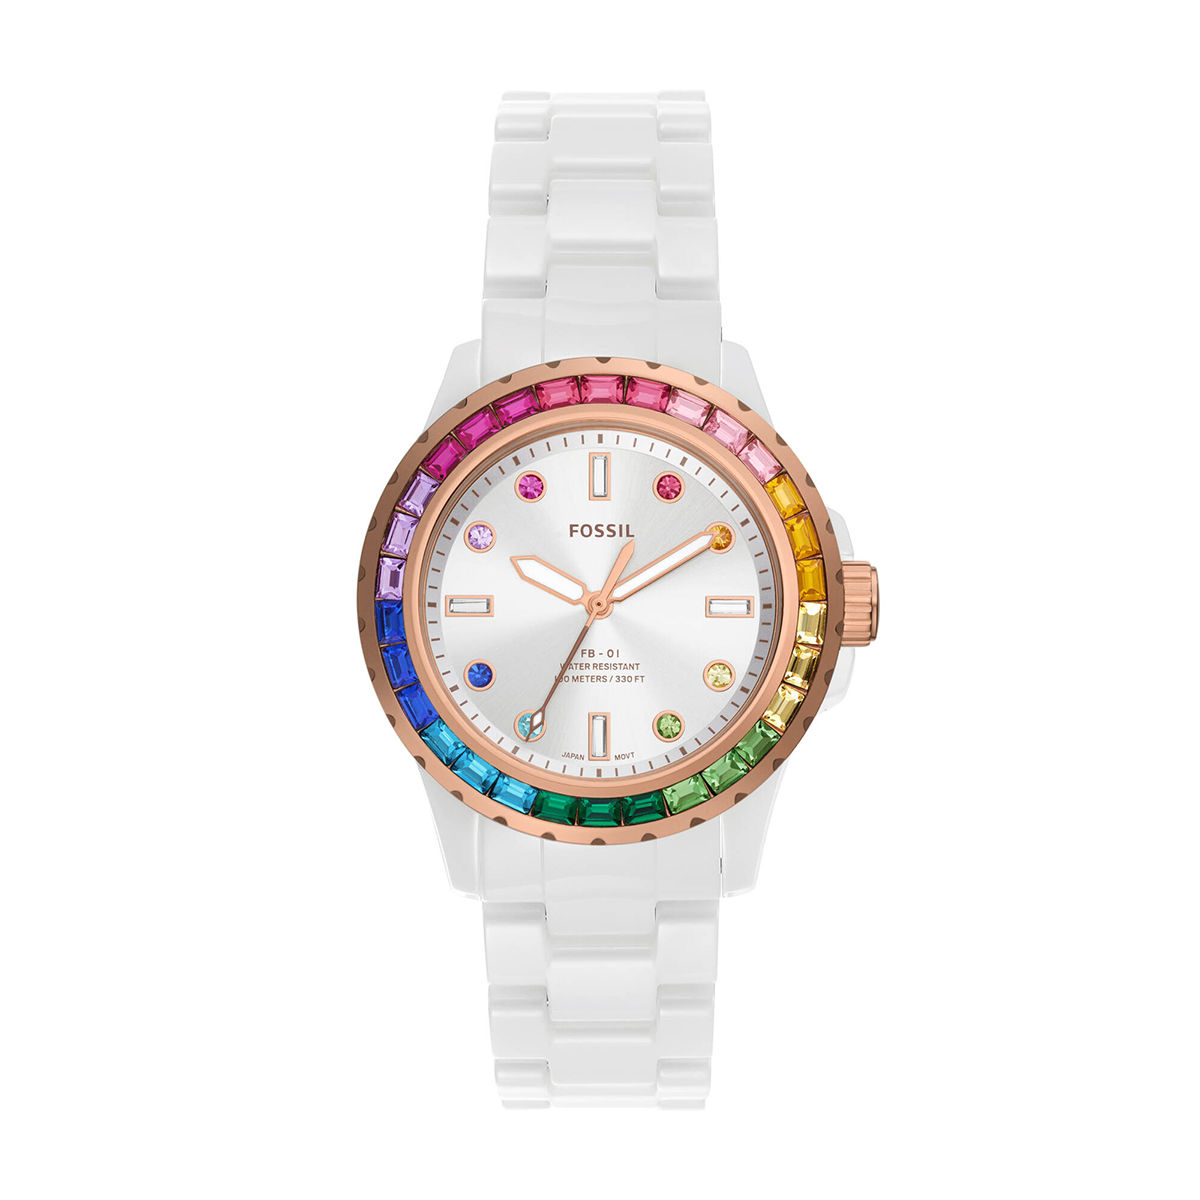 Fossil Fb-01 White Watch CE1129 (M)